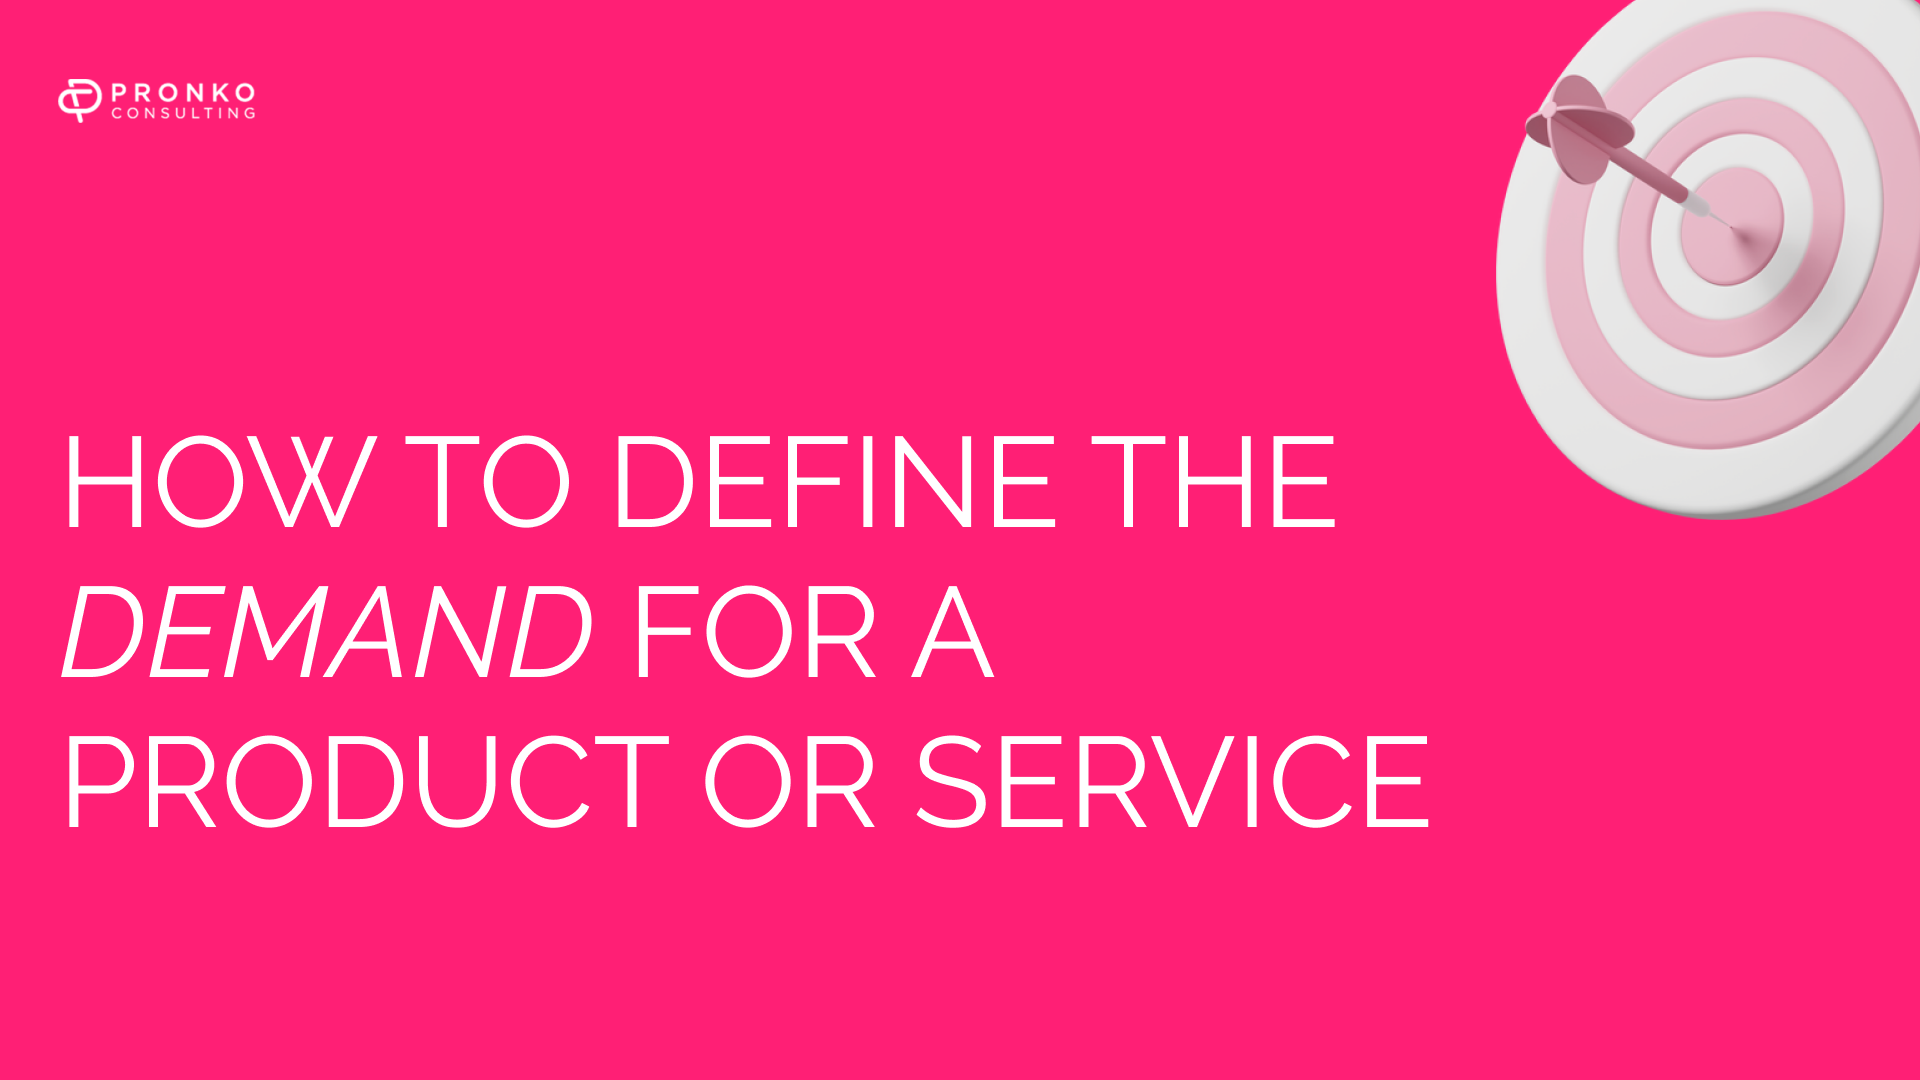 Four steps to assess the demand for a product or service